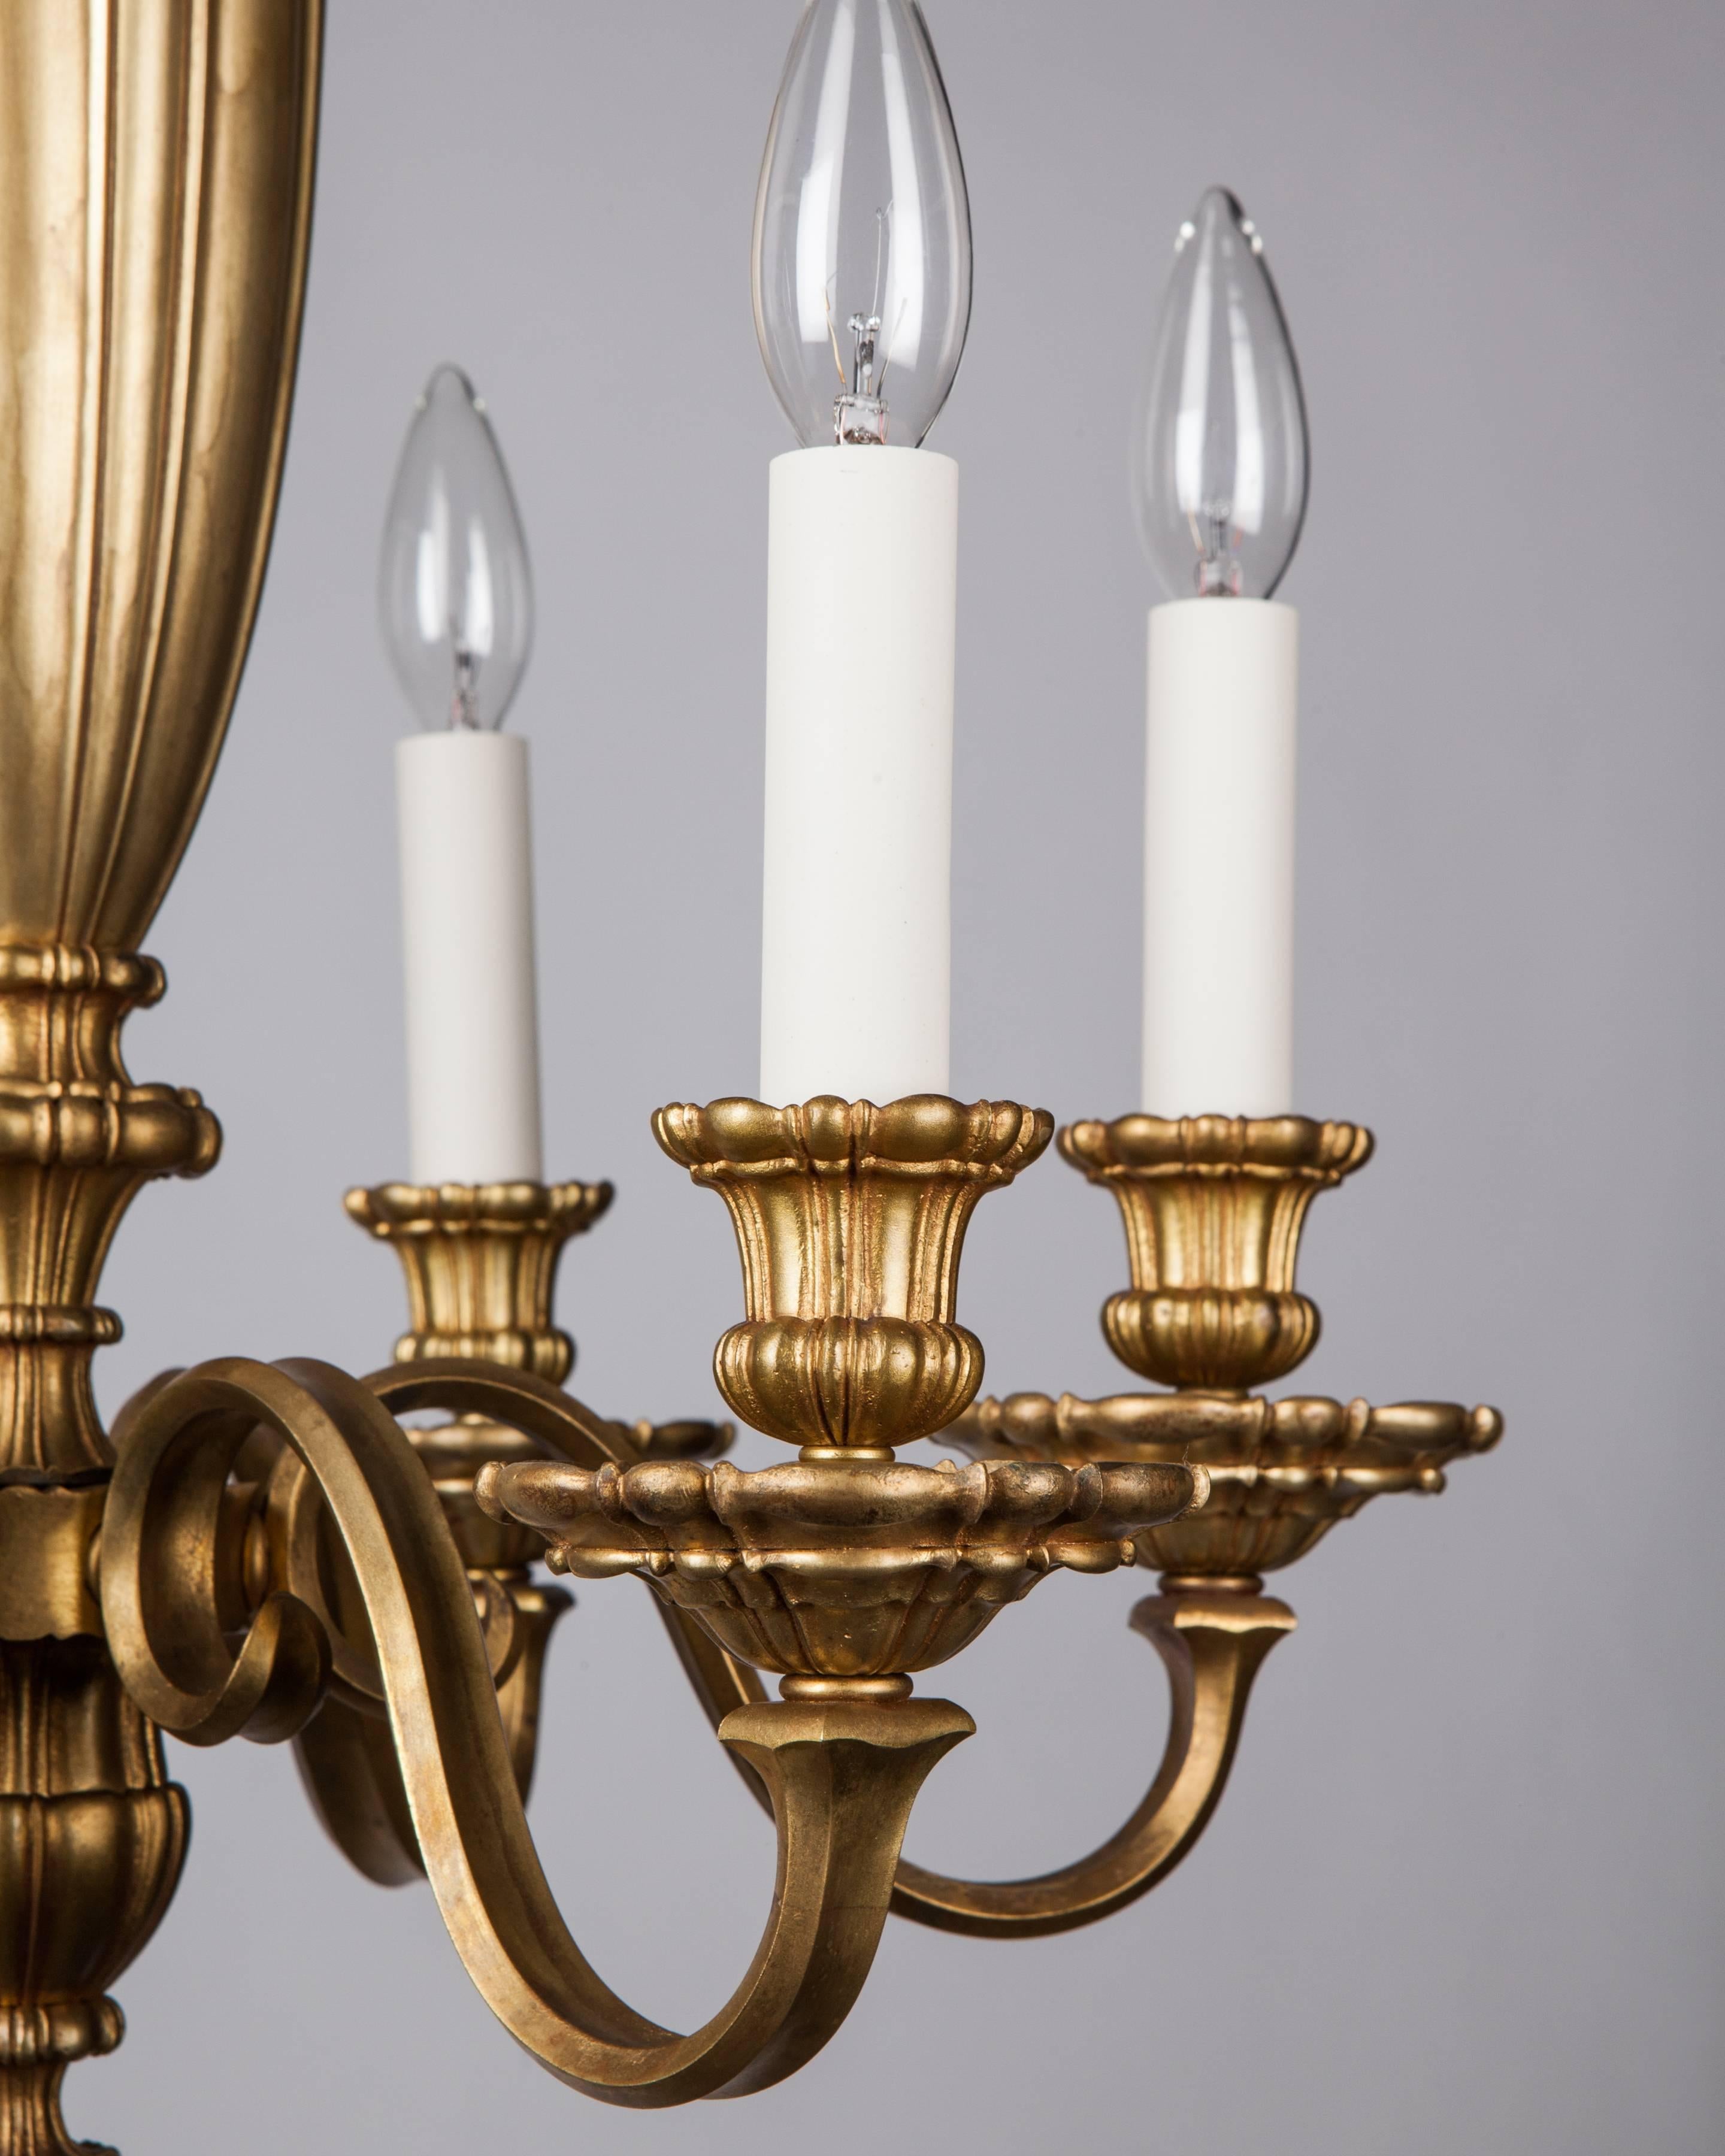 AHL4110
An antique six-light chandelier with linenfold details shared by the canopy, cups, waxpans and vasiform body. In a darkened brass finish retaining some of its original gilding. Attributed to the Boston maker Pettingell Andrews